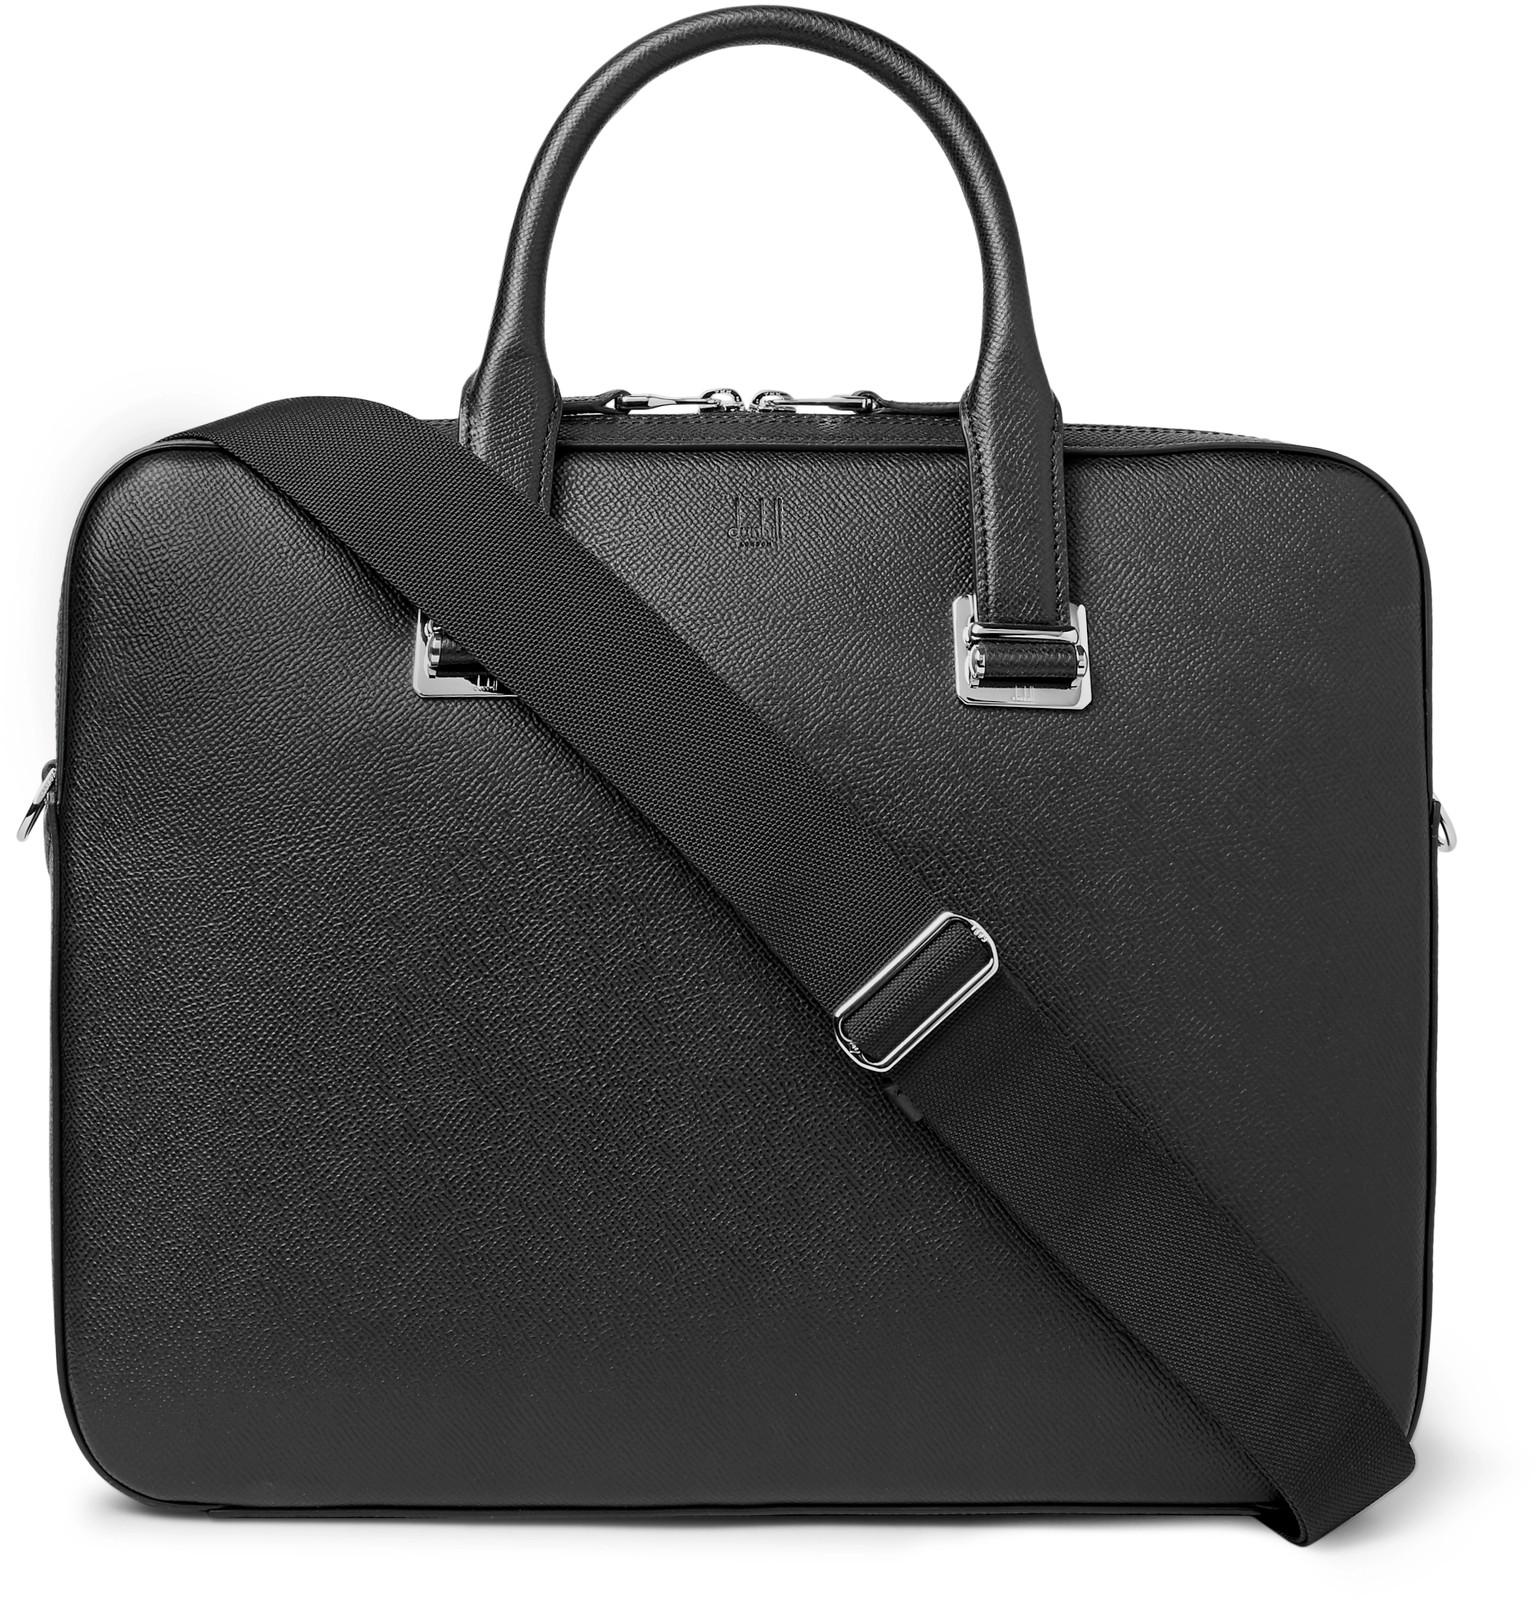 Dunhill Cadogan Full-grain Leather Briefcase in Black for Men - Lyst